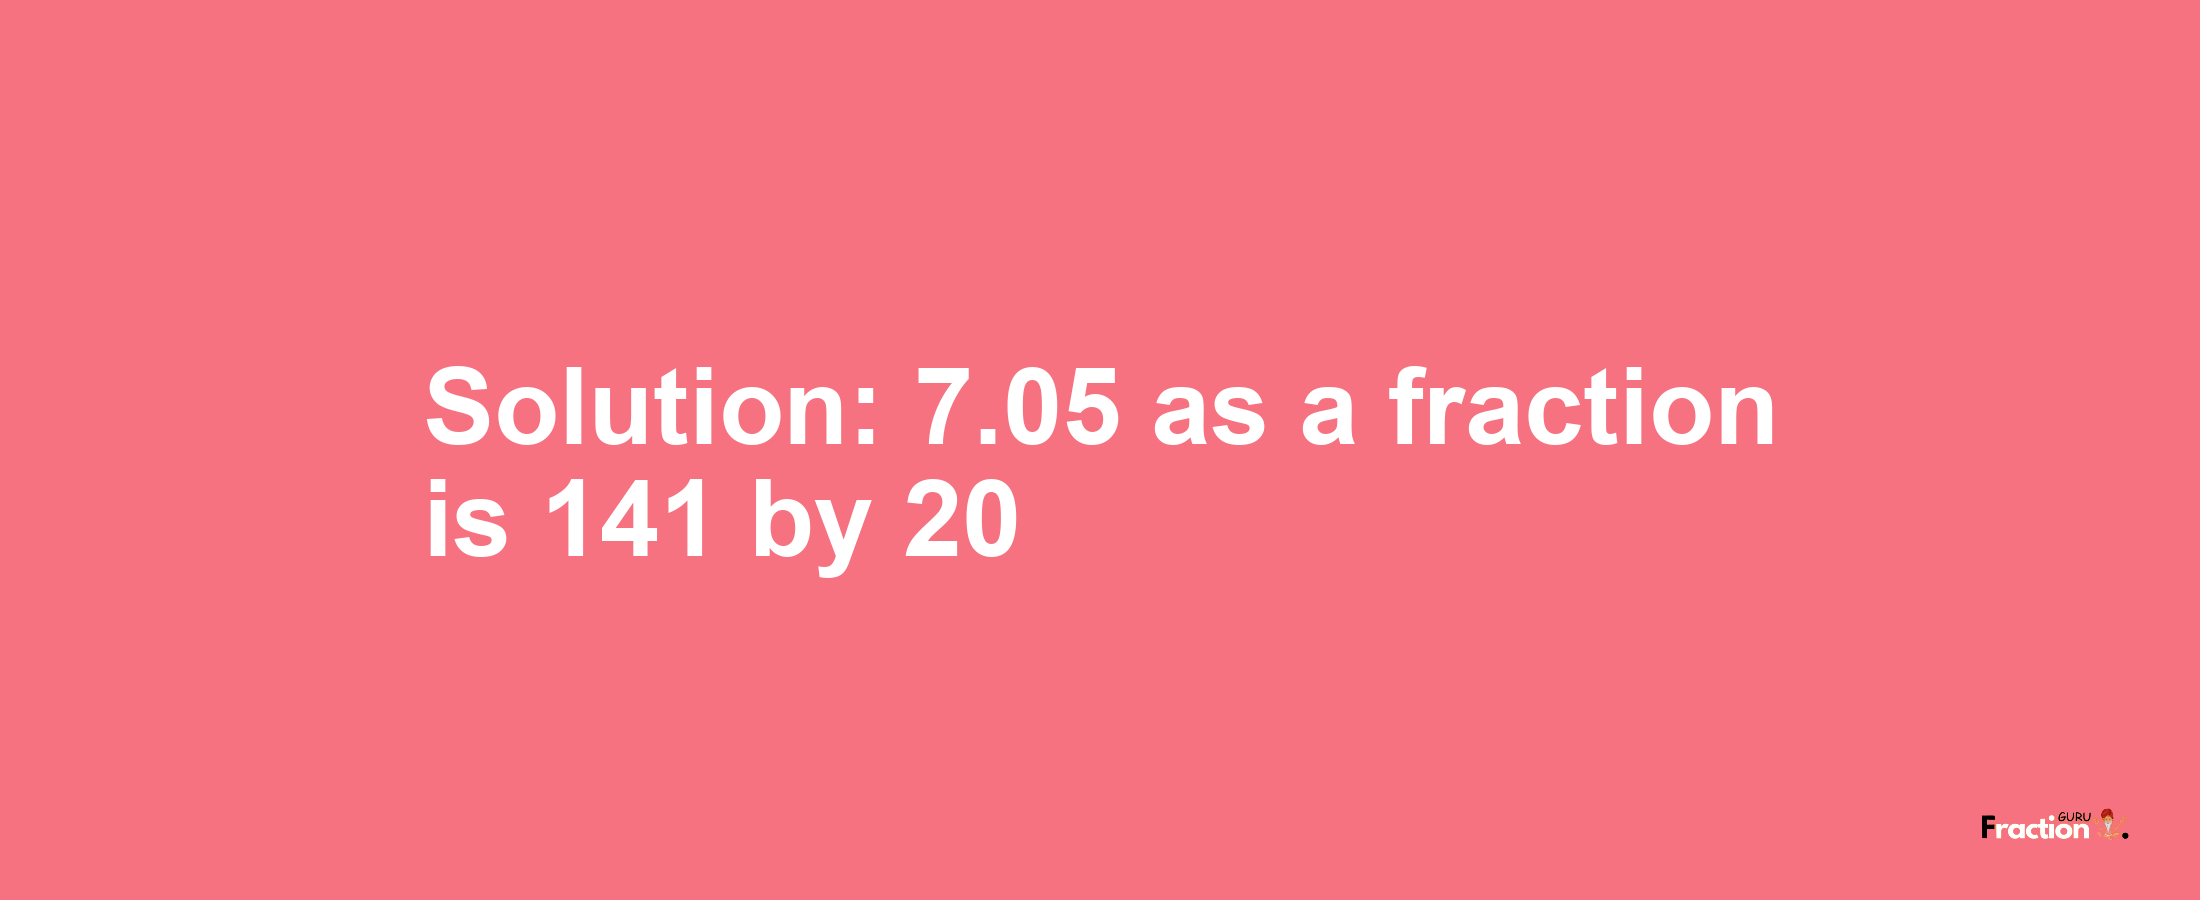 Solution:7.05 as a fraction is 141/20